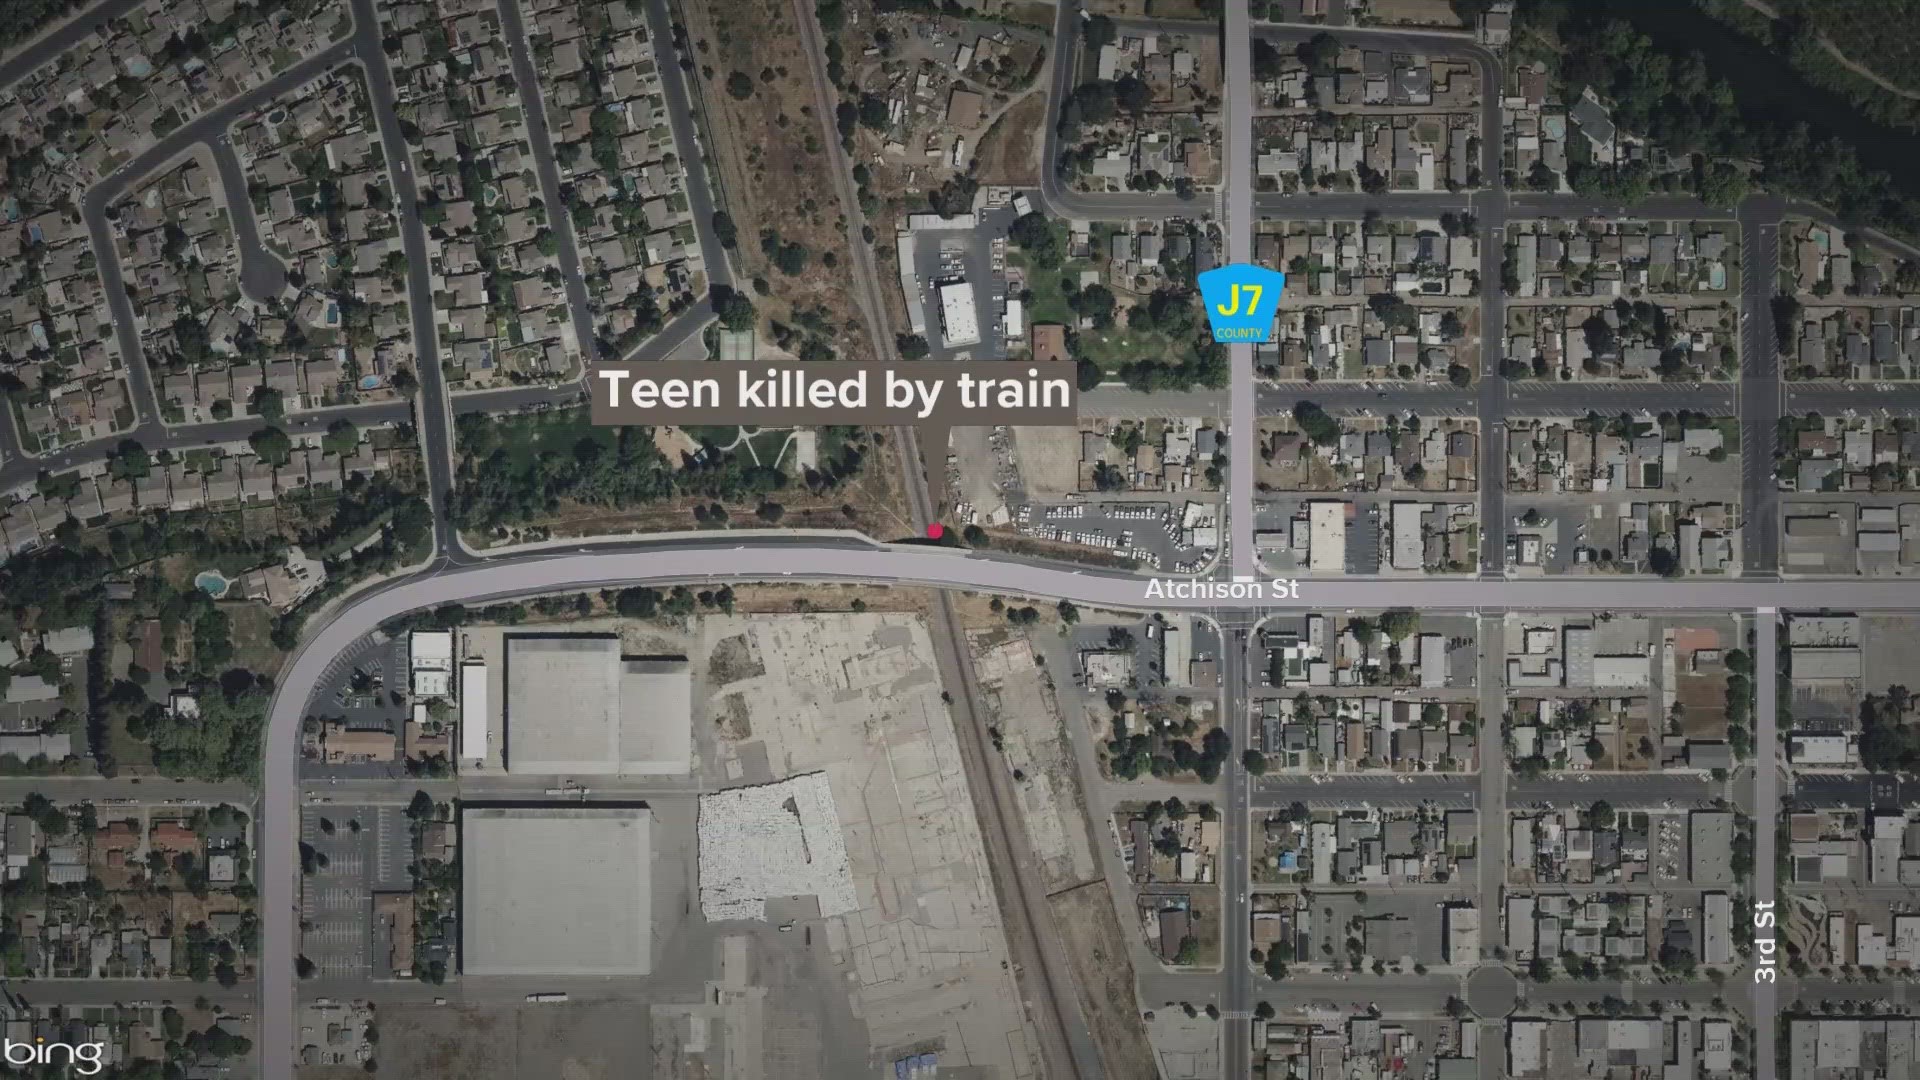 Deputies are investigating after a 17-year-old girl was hit and killed by a train Monday morning.